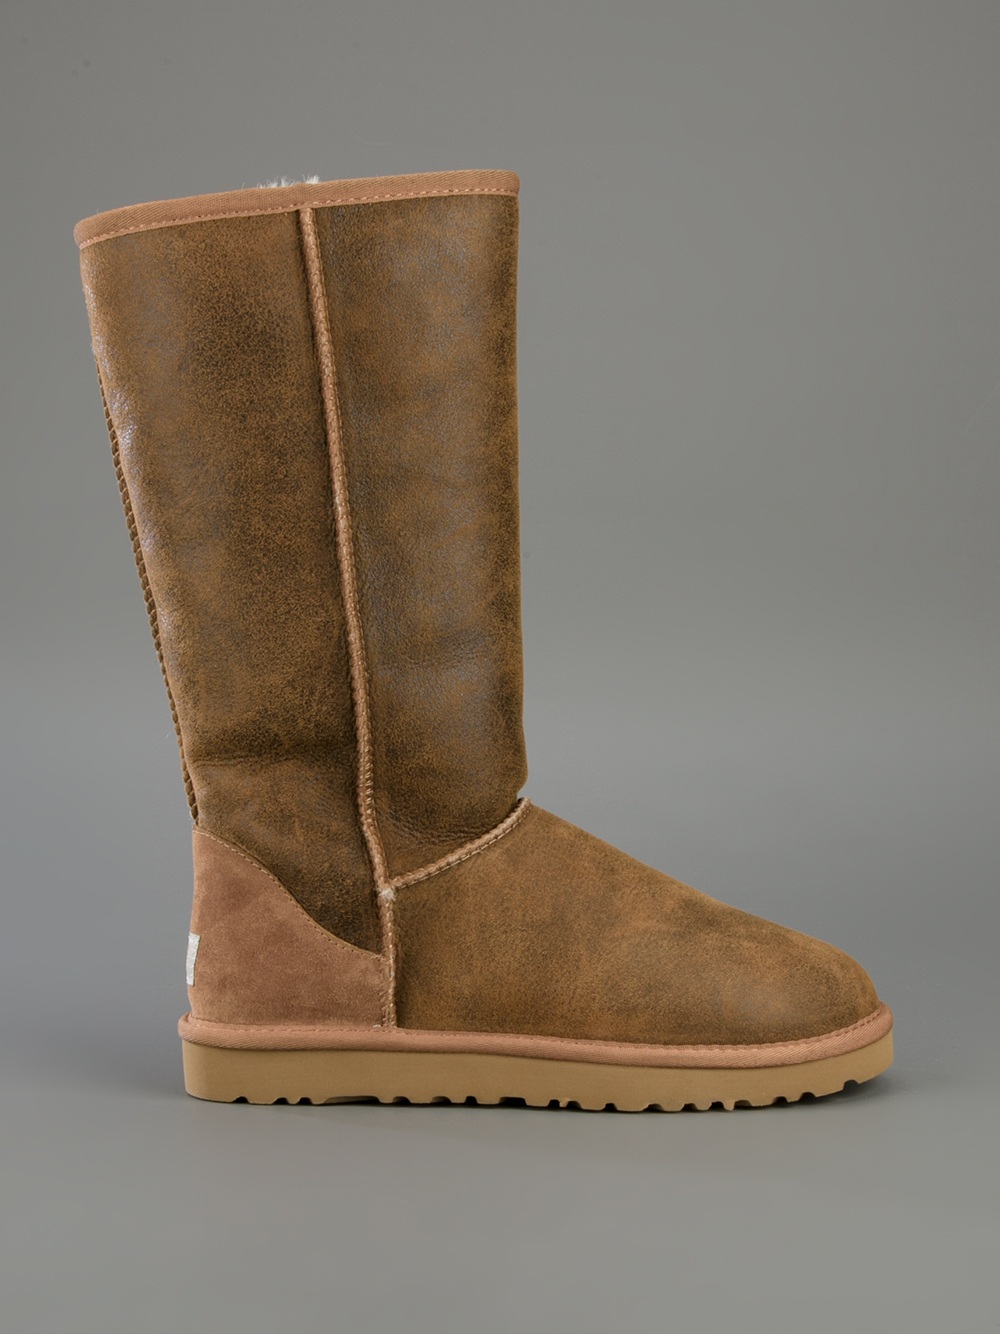 Lyst - Ugg Classic Tall Bomber Sheepskin Boot in Brown